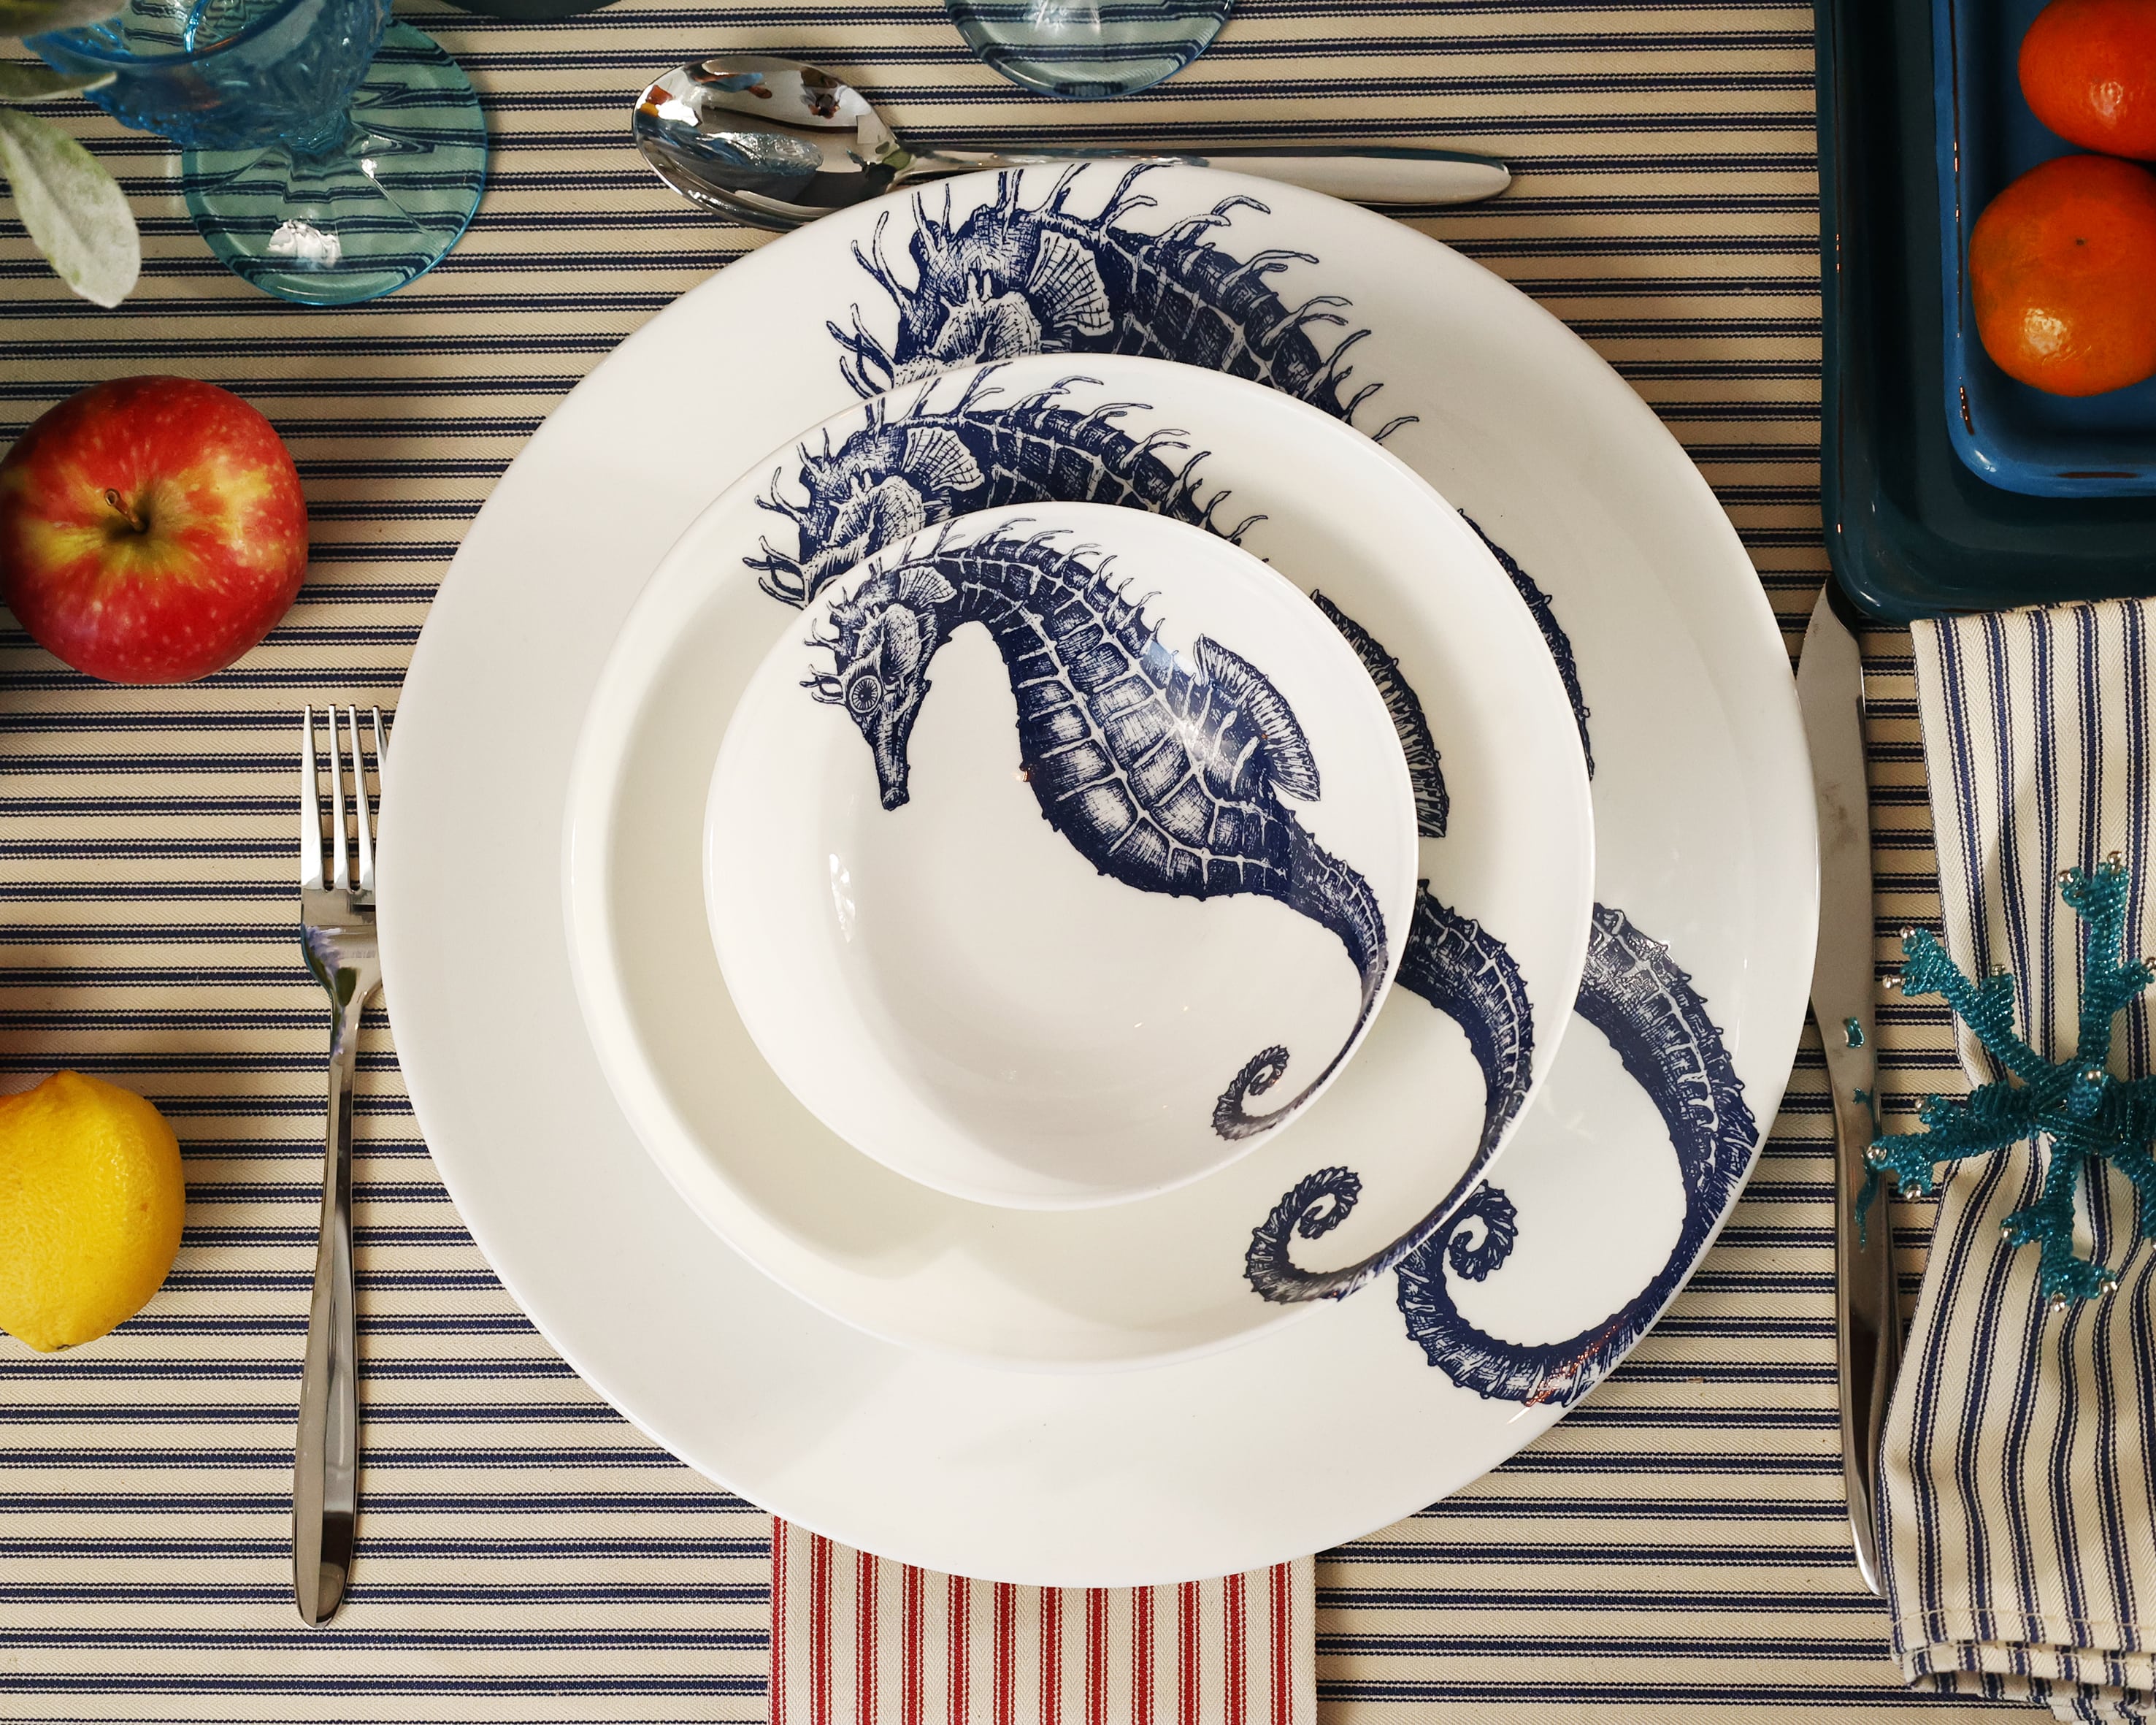 Aerial view of  pasta bowl in Bone China in our Classic range in Navy and white in the  Seahorse design,placed on a matching dinner plate and has a smaller bowl placed inside.This is placed on a stripe tablecloth with various other tableware around the edge